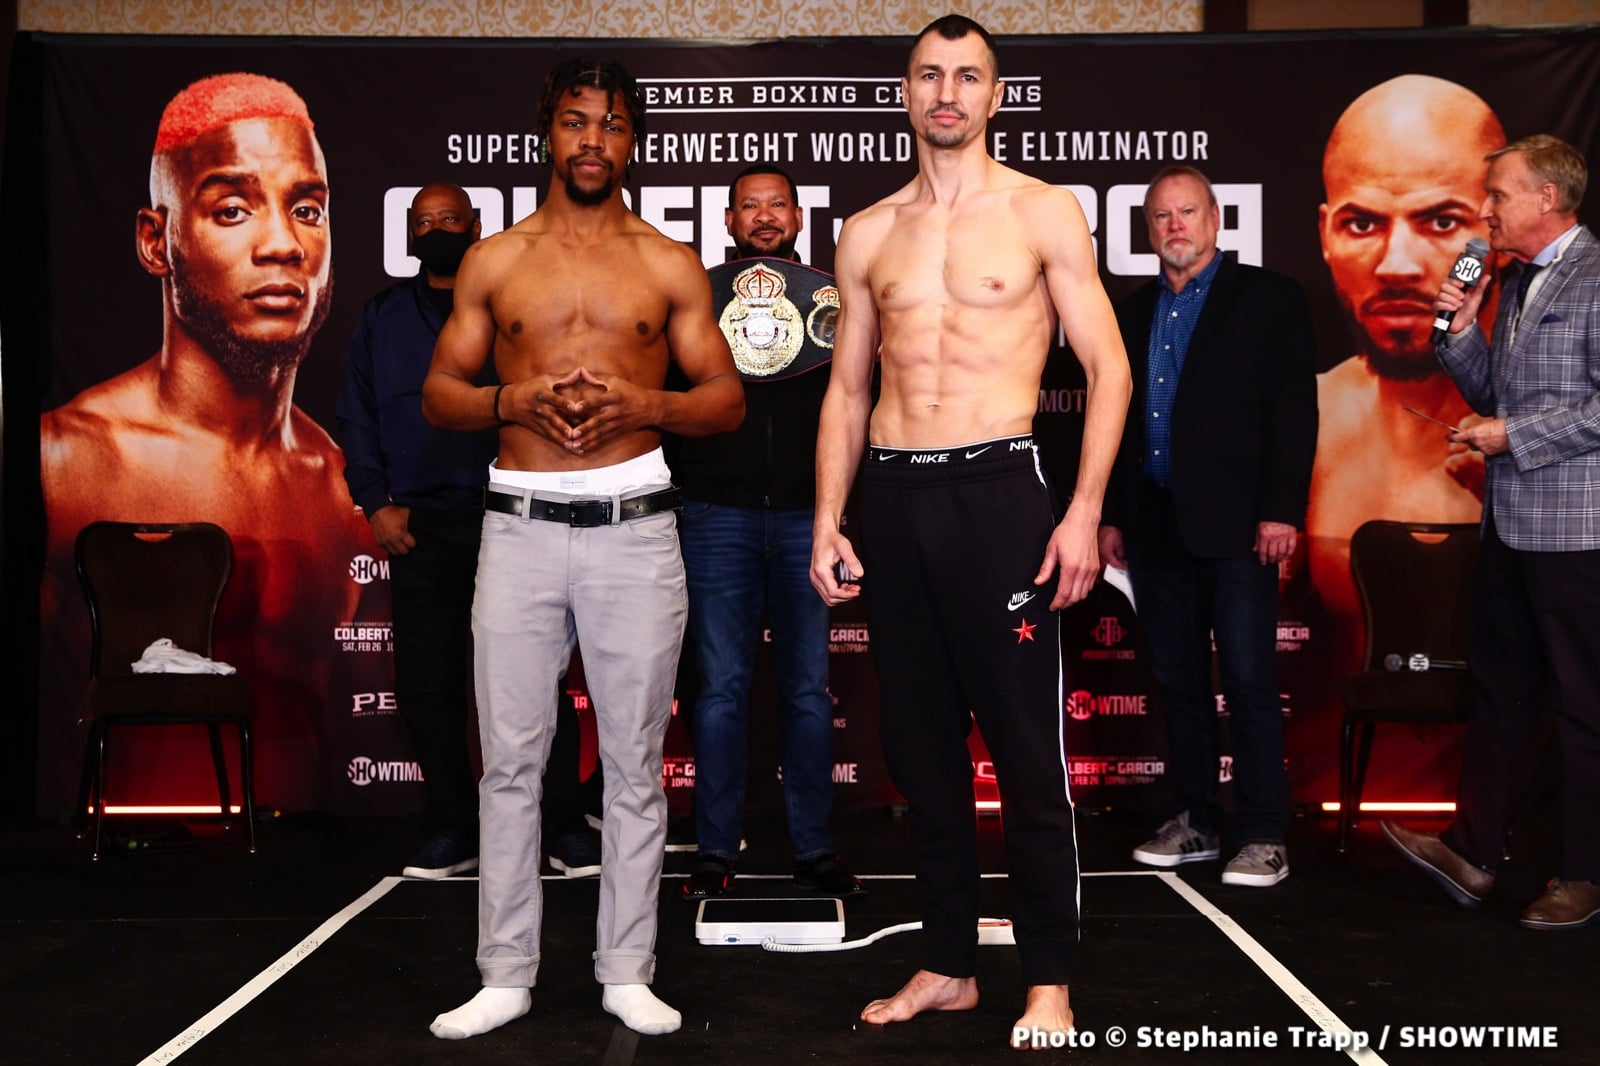 Chris Colbert - Hector Luis Garcia Official Showtime Weigh In Results